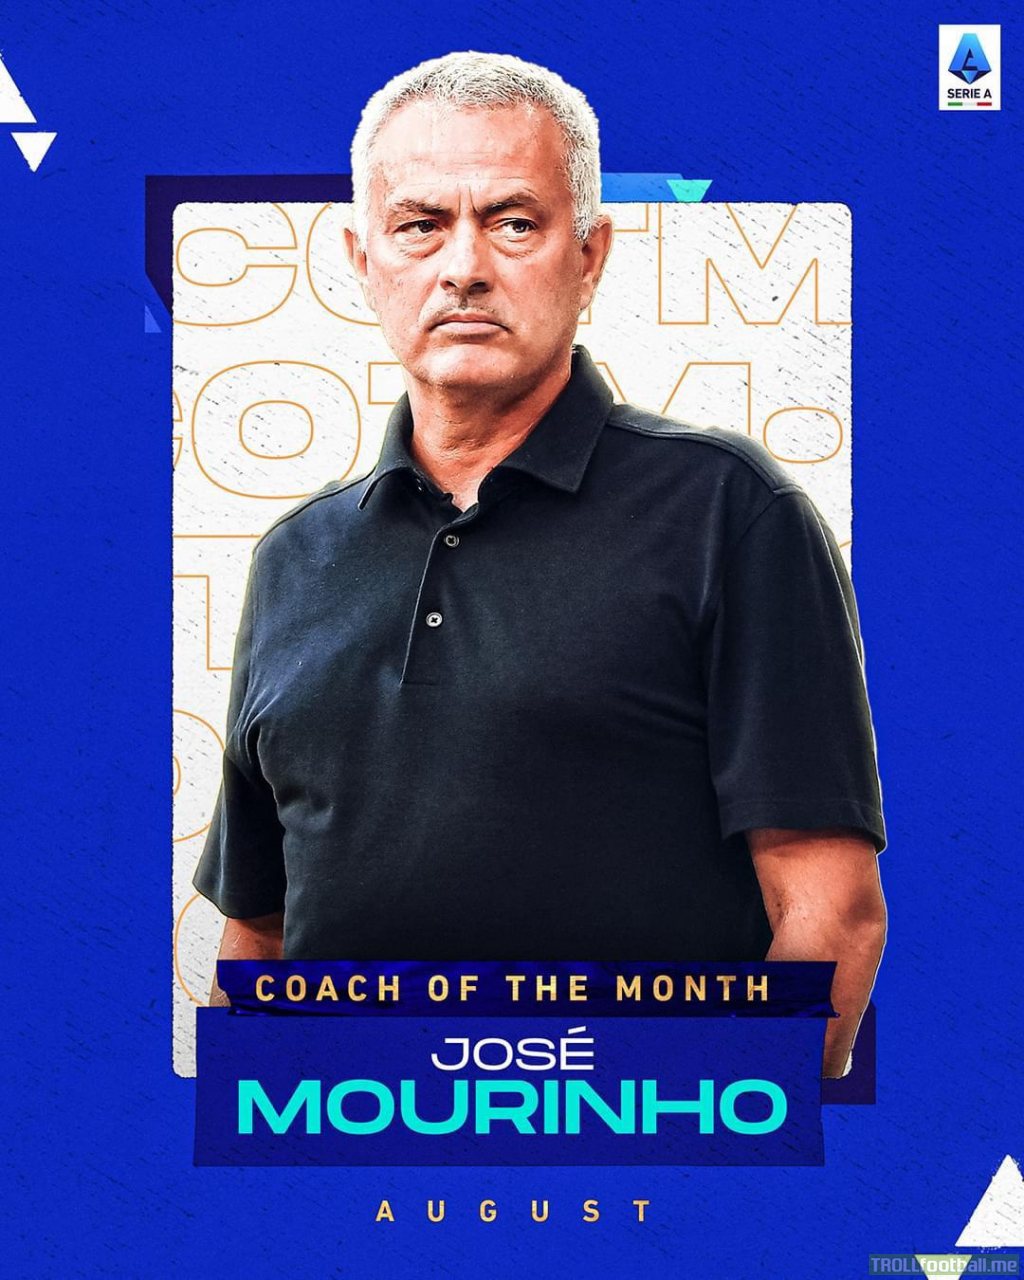 Jose Mourinho has been awarded the Best Serie A Coach of the Month for August!